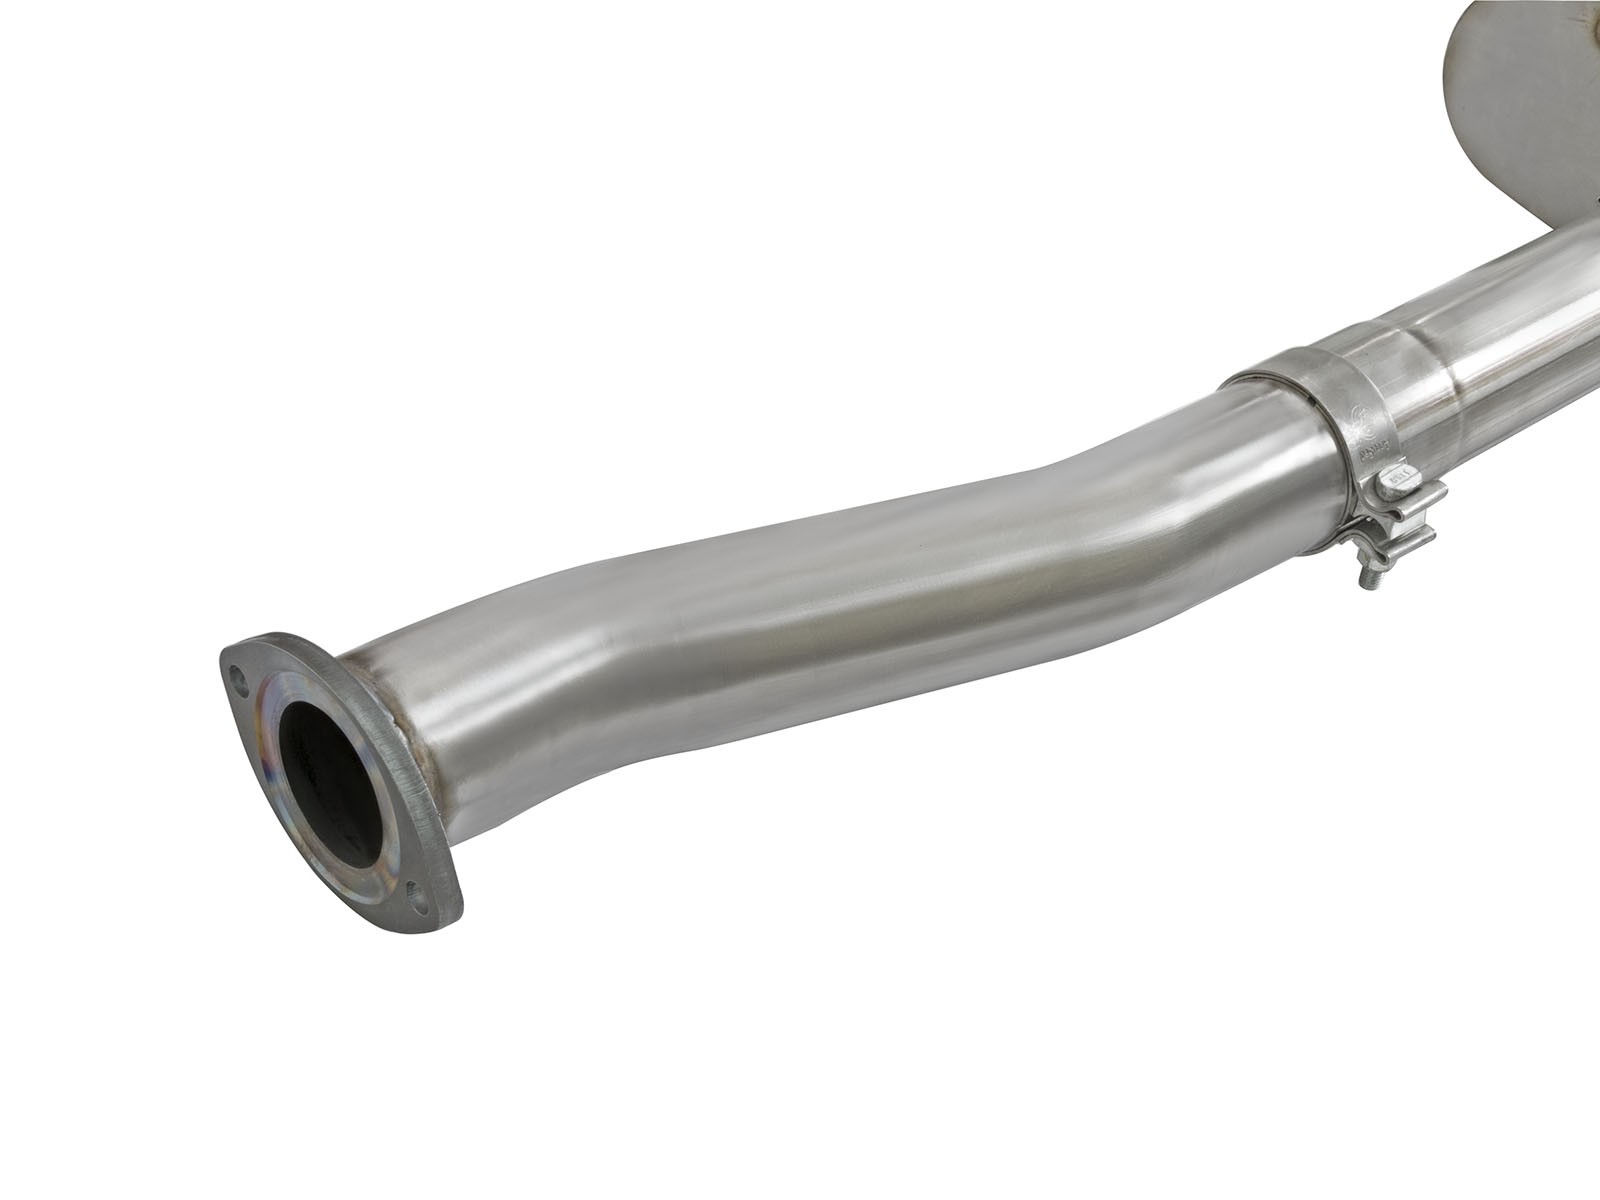 aFe POWER MACH Force-Xp 3" Stainless Steel Cat-Back Exhaust System - Polished Tip